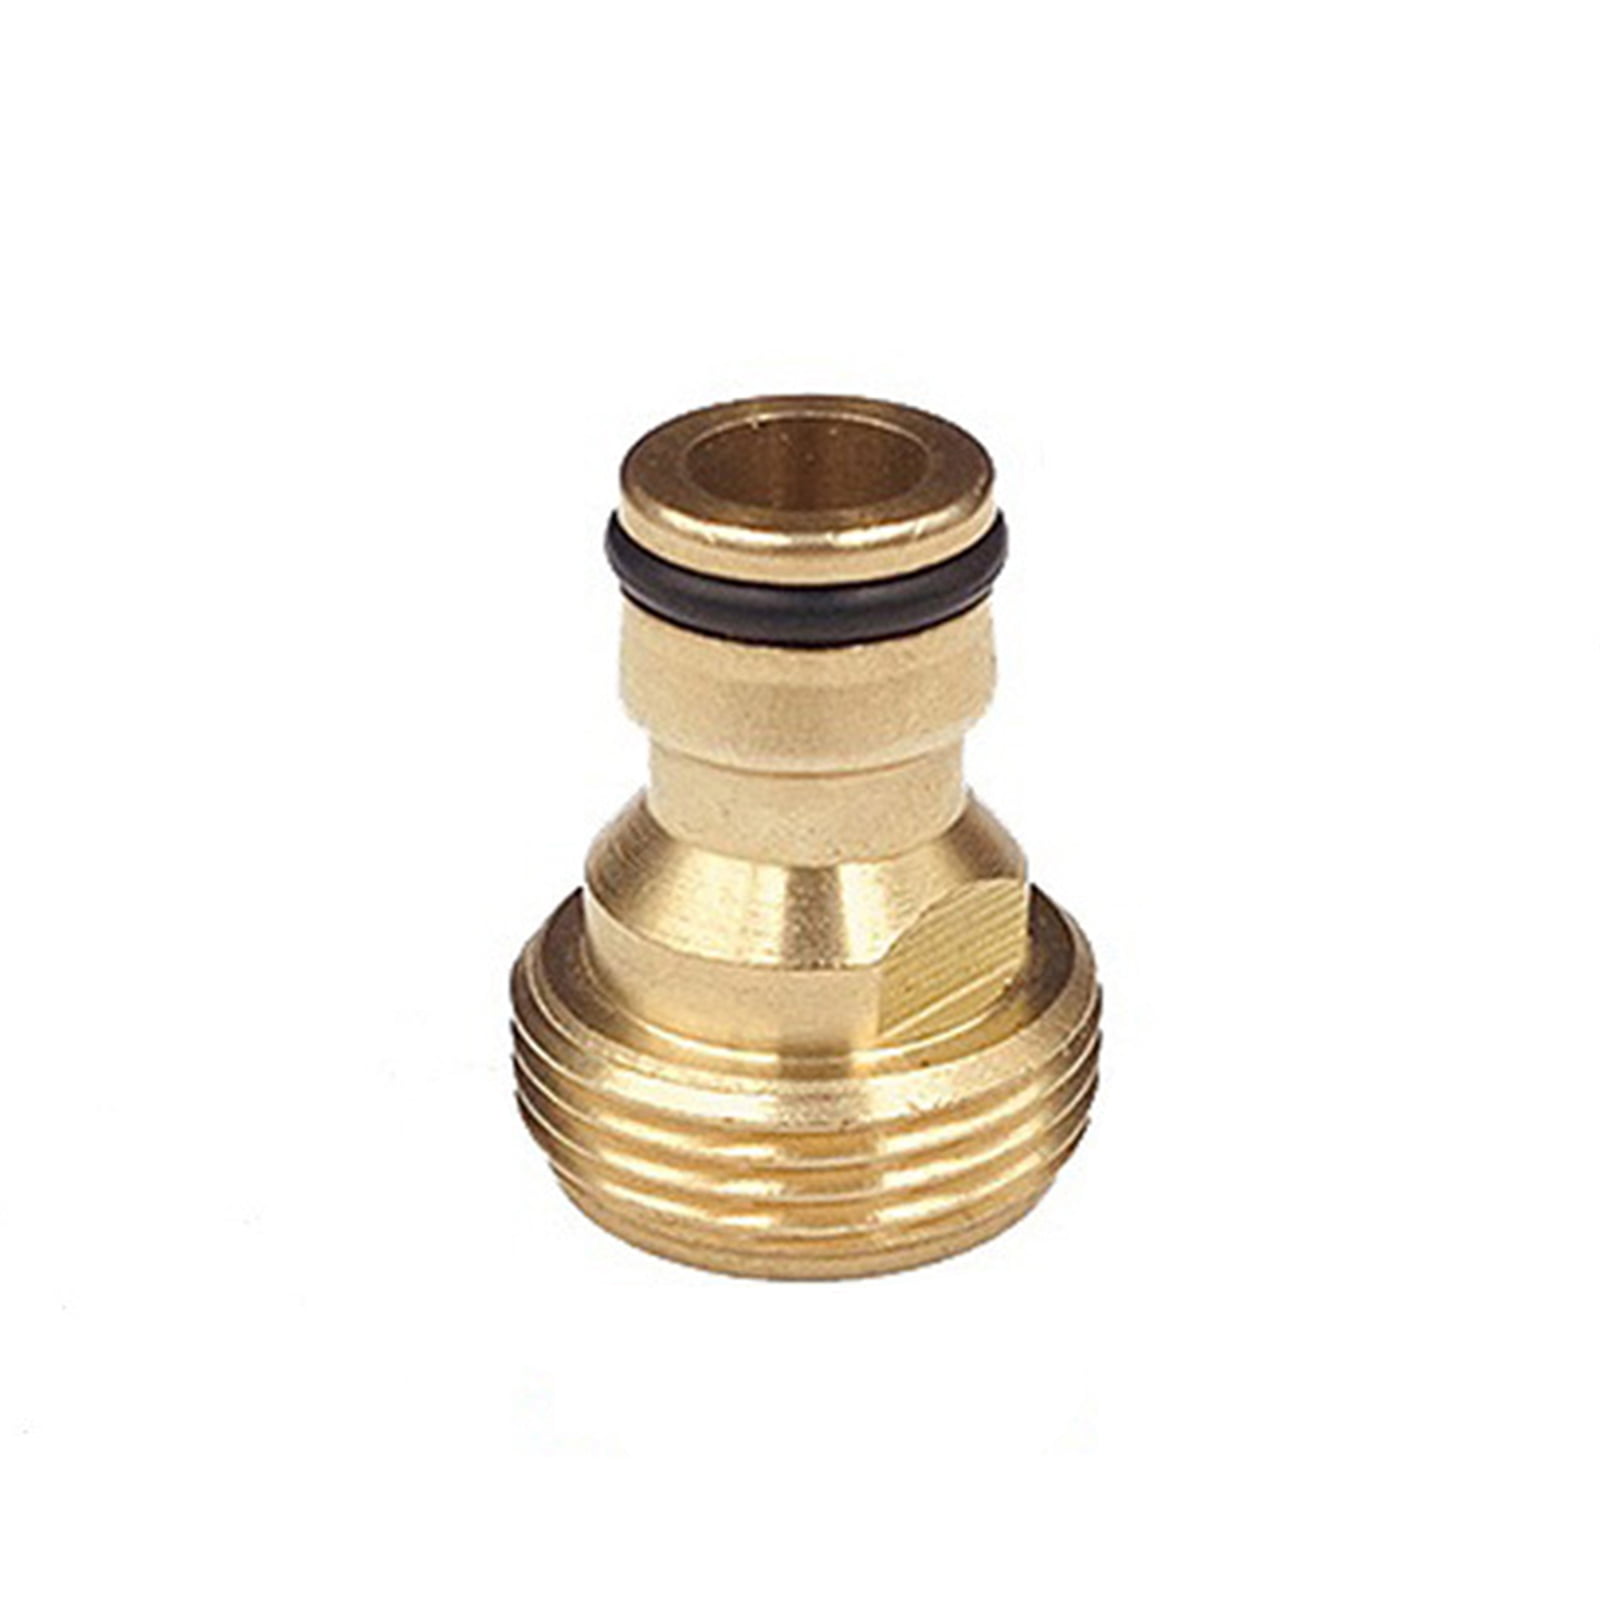 Hozelock Compatible 3/4" Brass Hose Repair Connector For Garden Hose Pipe Water 